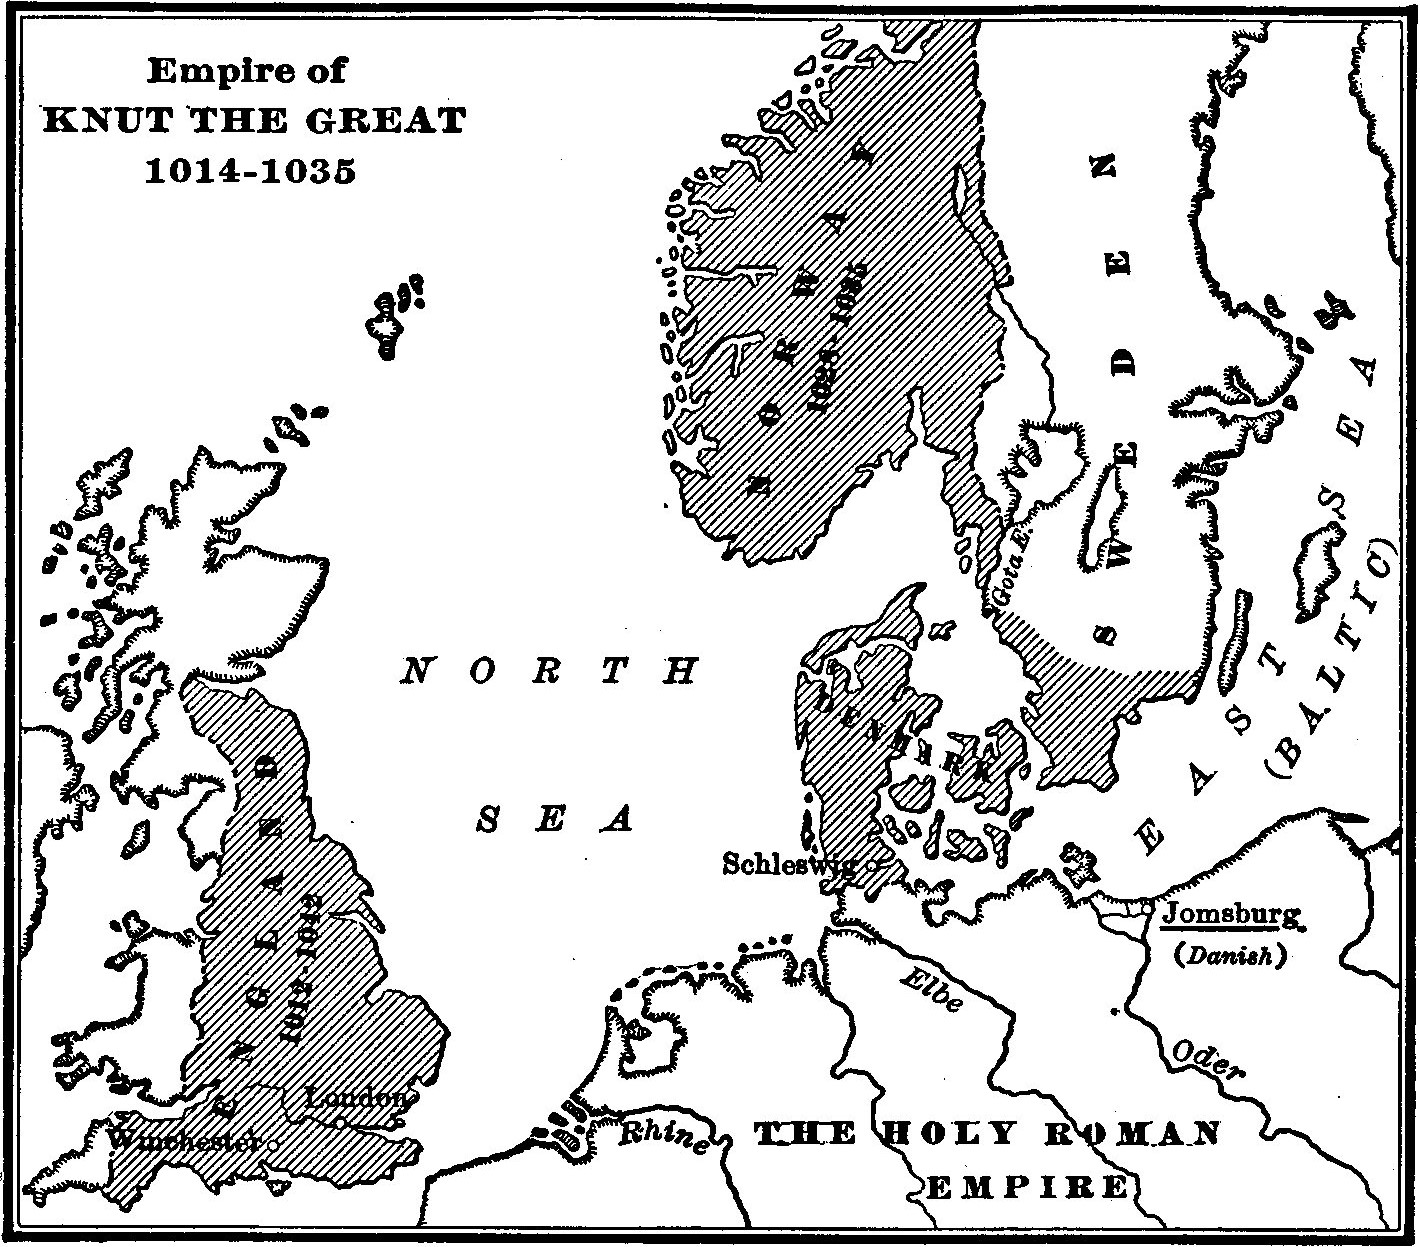 Empire of Knut the Great, 1014-1035